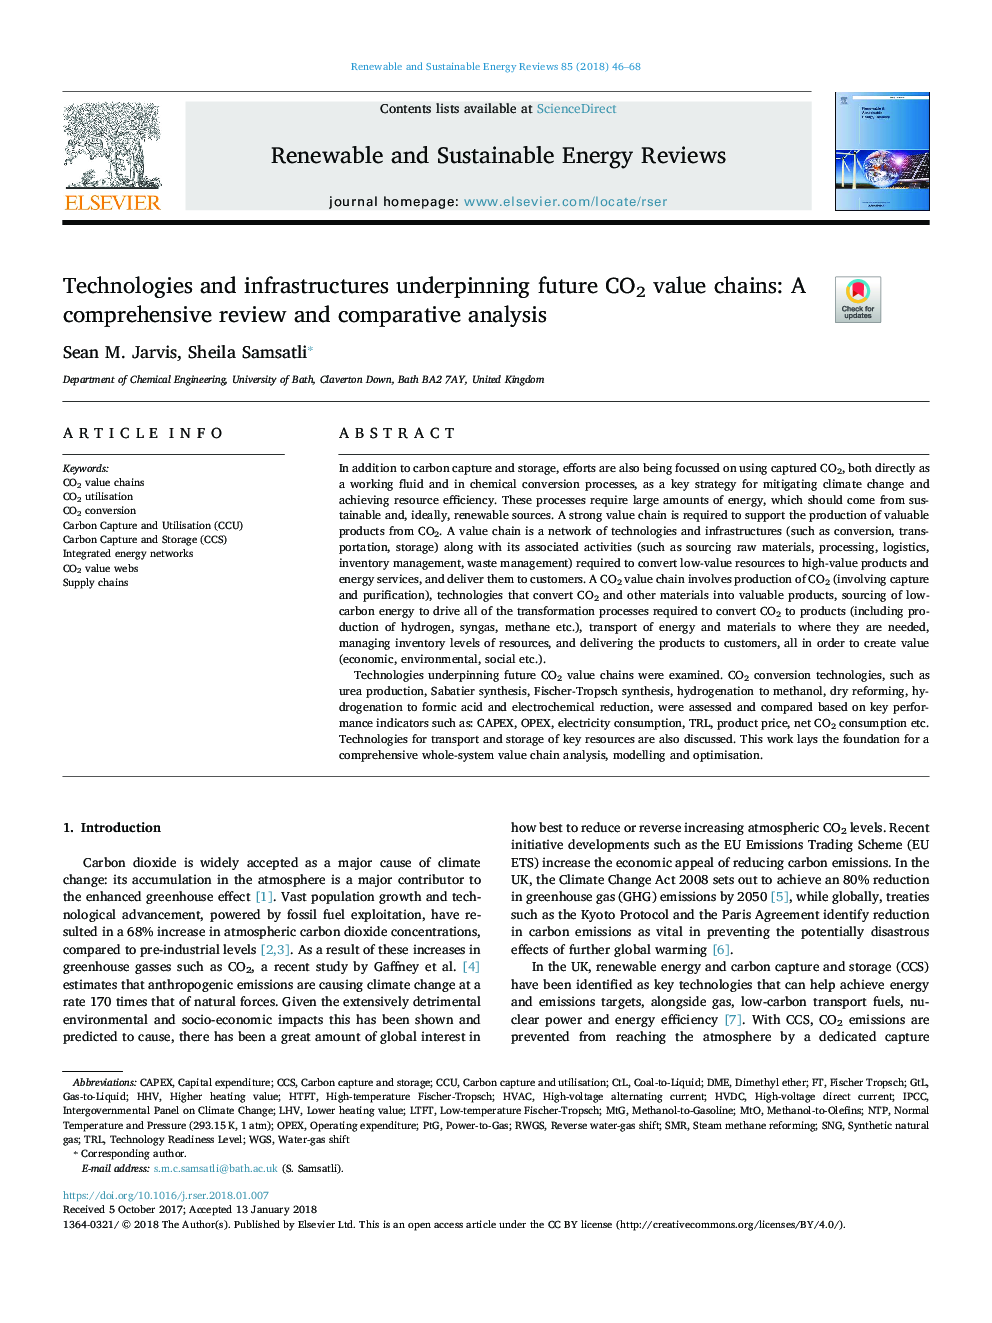 Technologies and infrastructures underpinning future CO2 value chains: A comprehensive review and comparative analysis